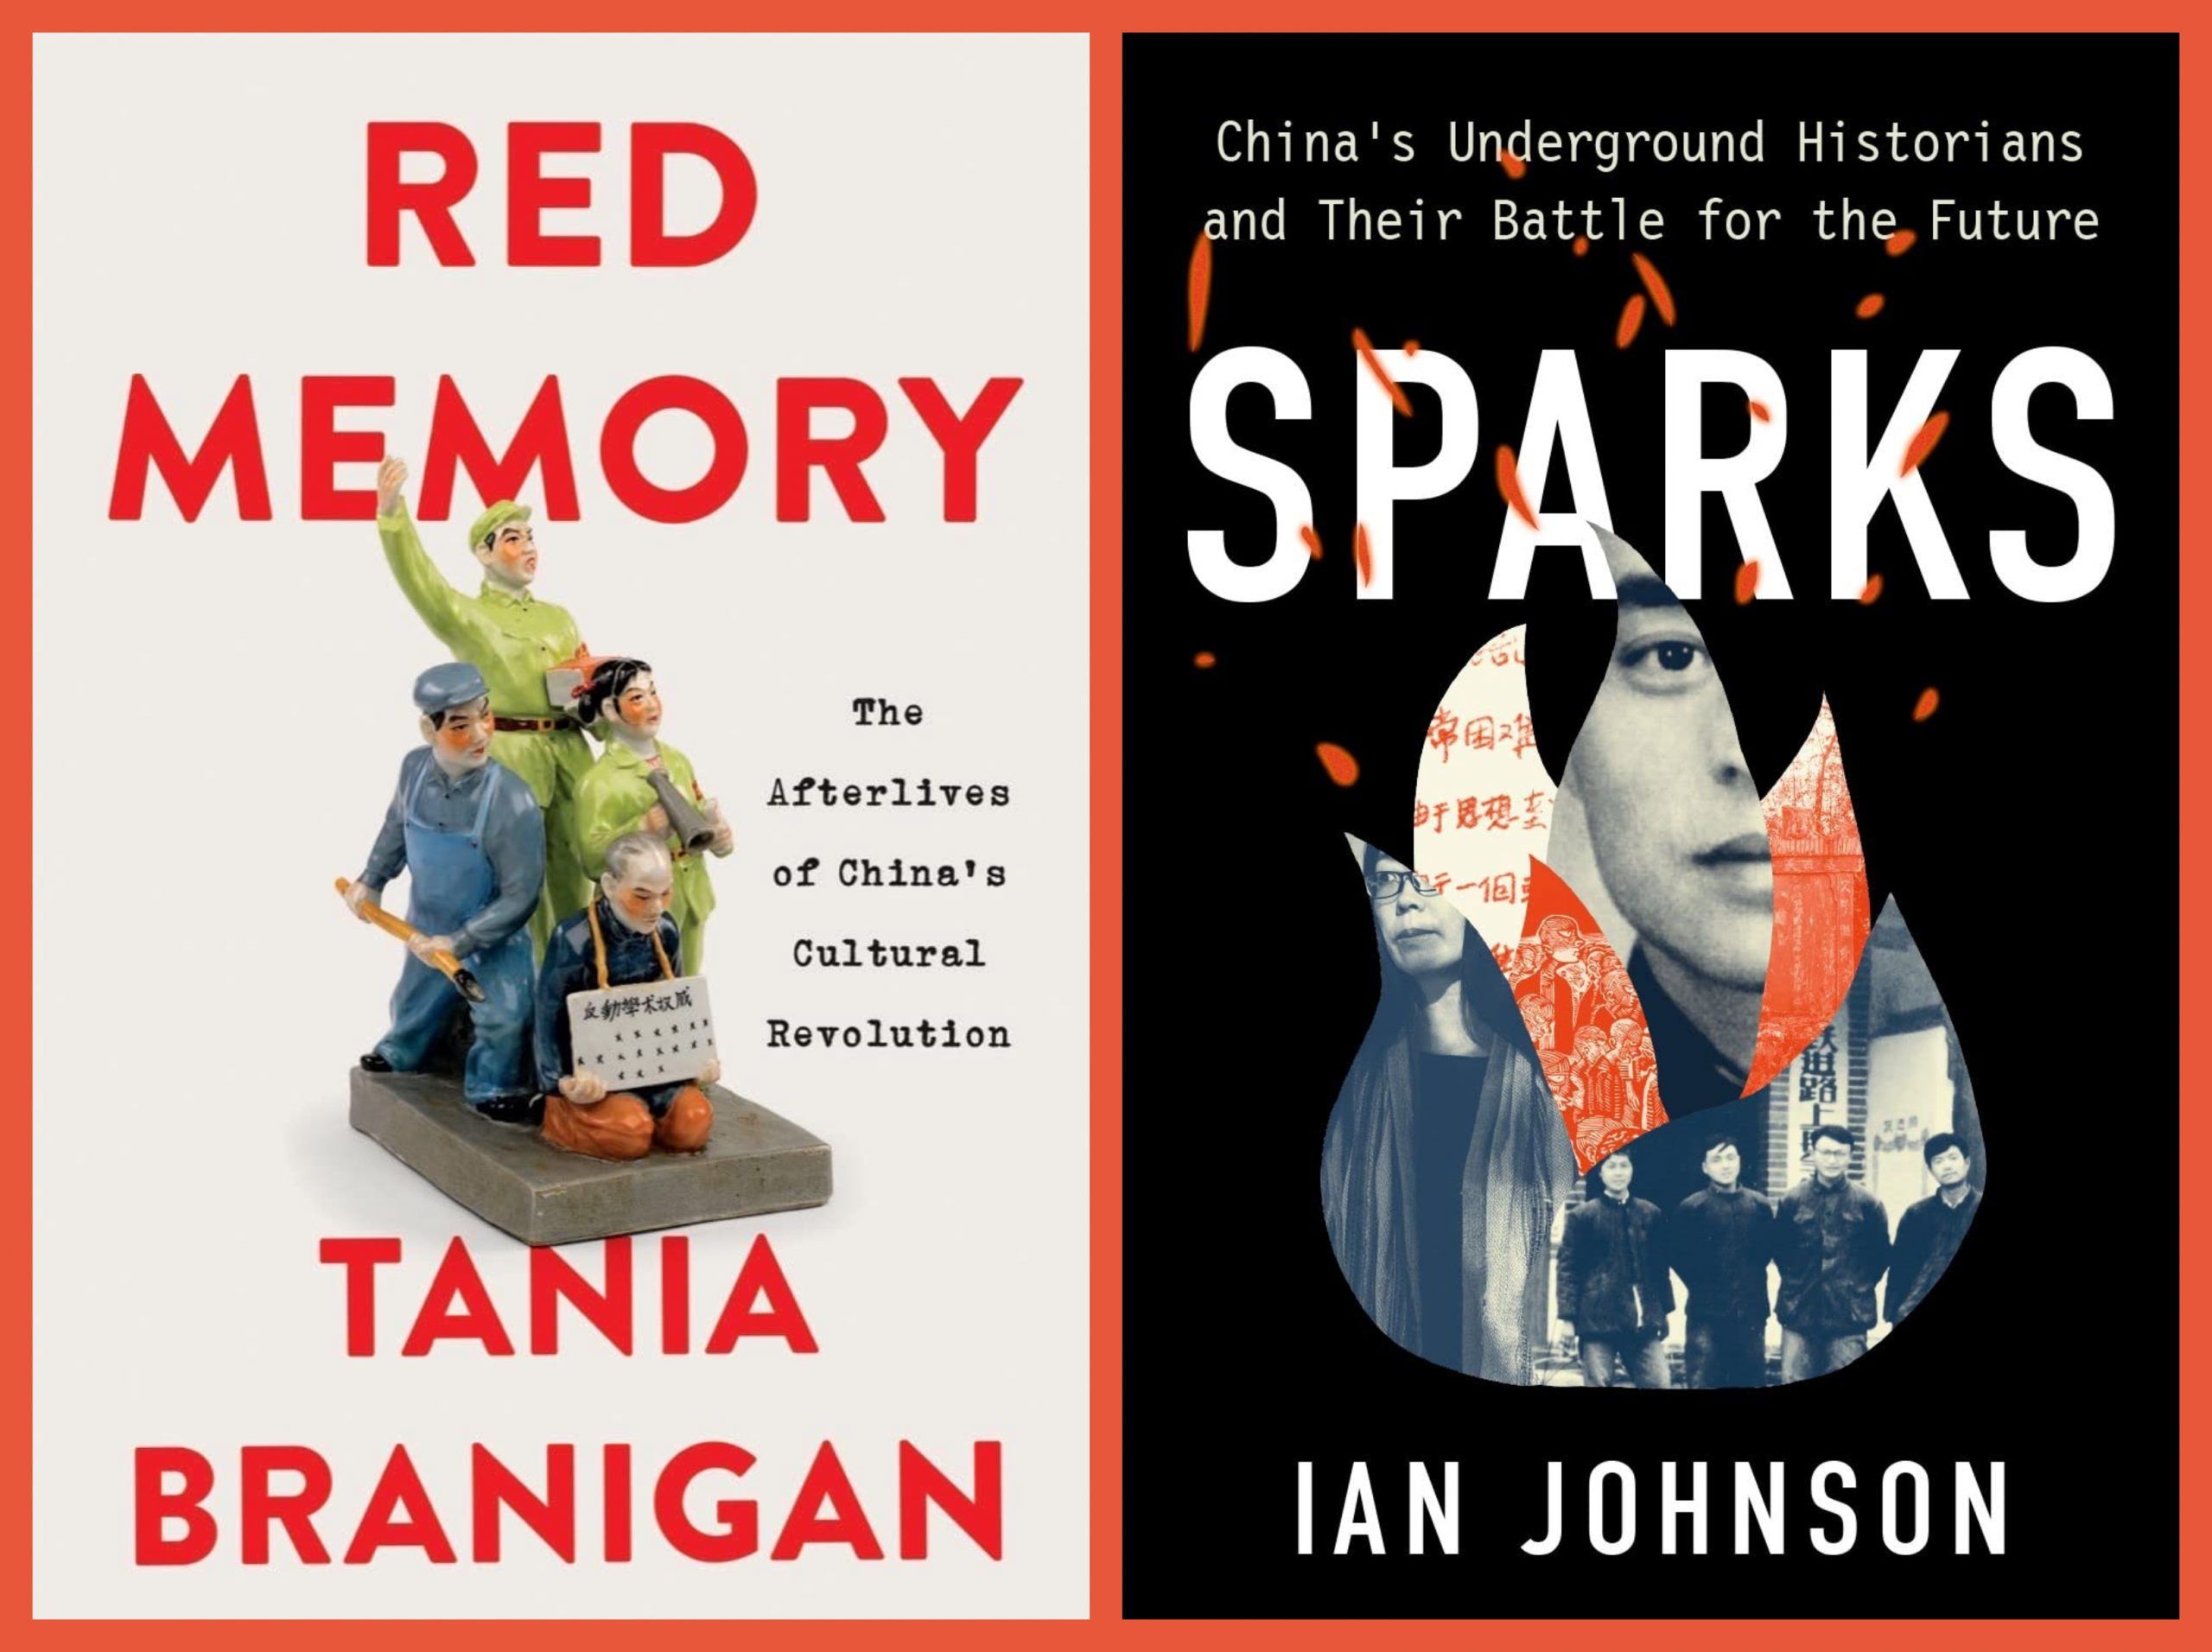 History as Dissent: On Ian Johnson’s “Sparks” and Tania Branigan’s “Red Memory”